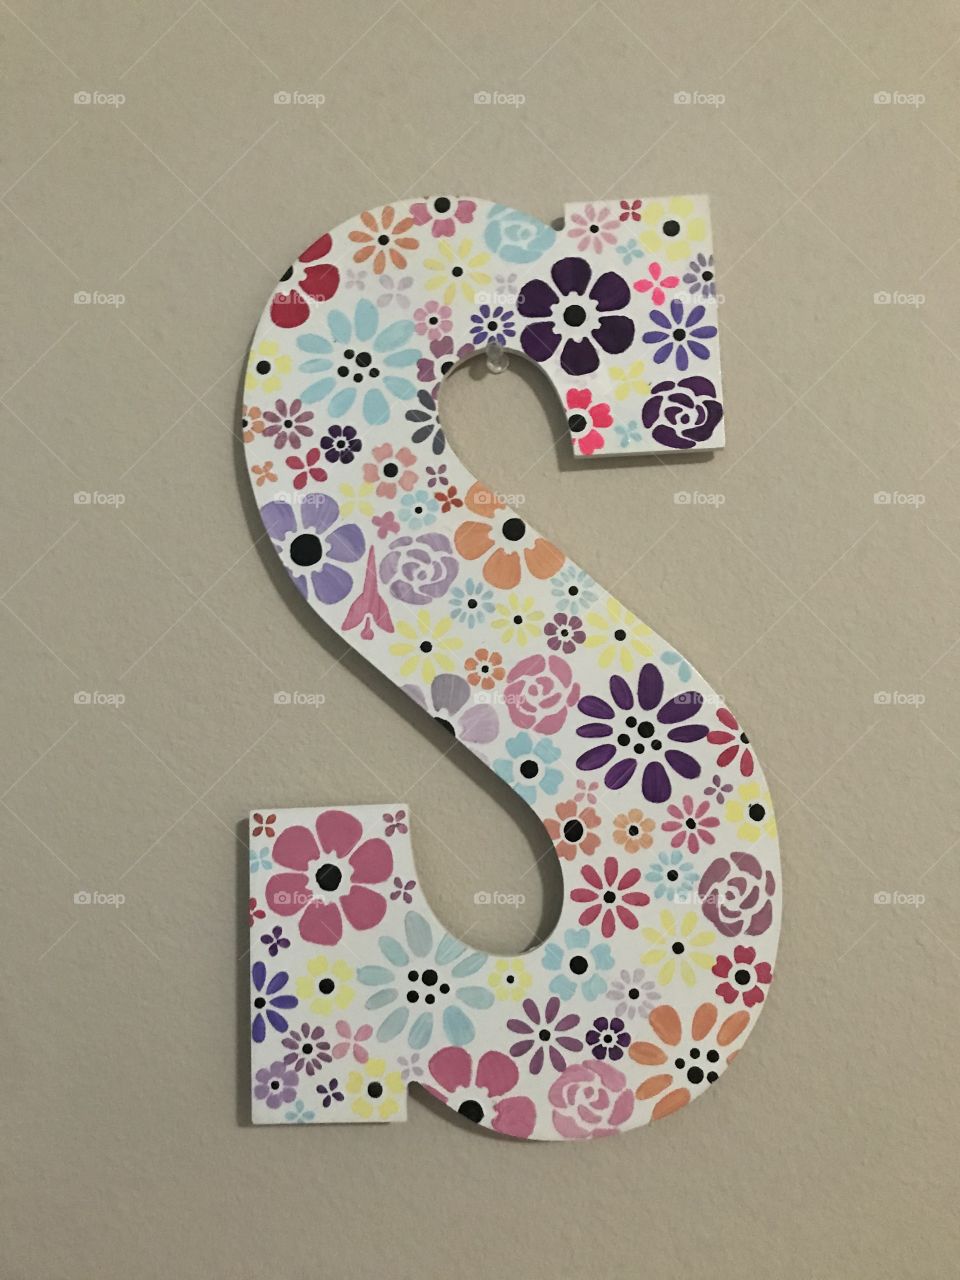 Cute painted s monogrammed sign covered with acrylic flowers on a white background 